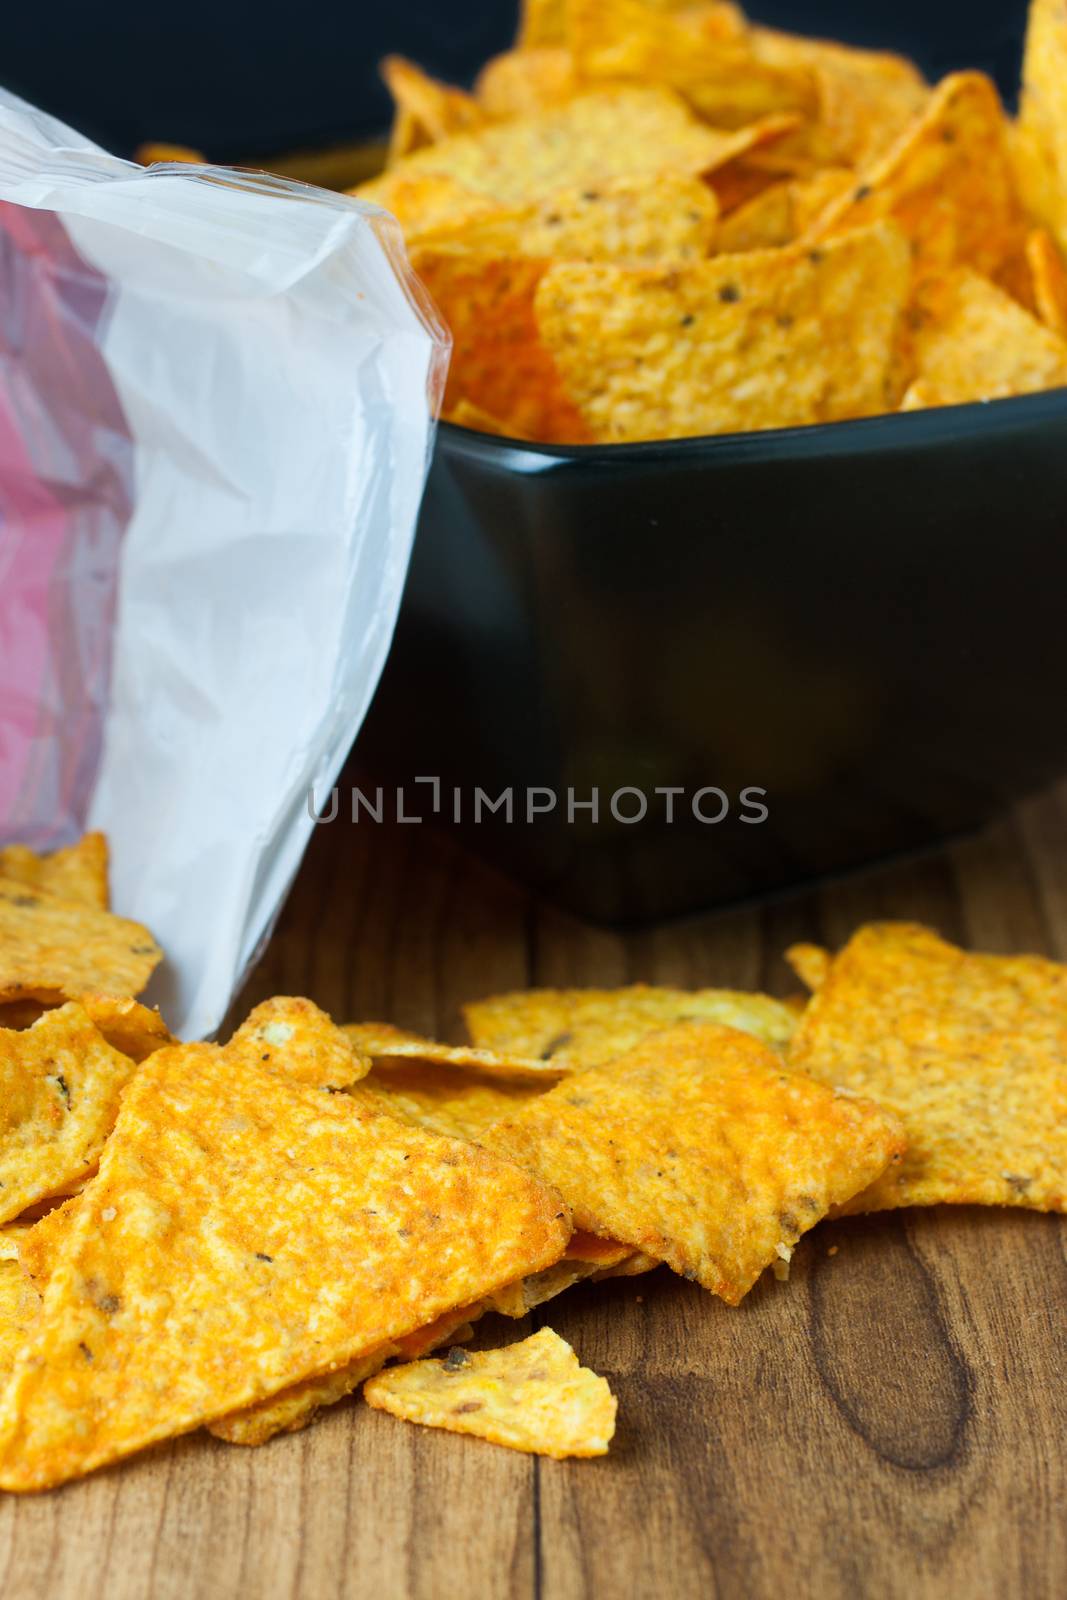 Nacho cheese flavored tortilla chips in a dark bowl on a wooden table.